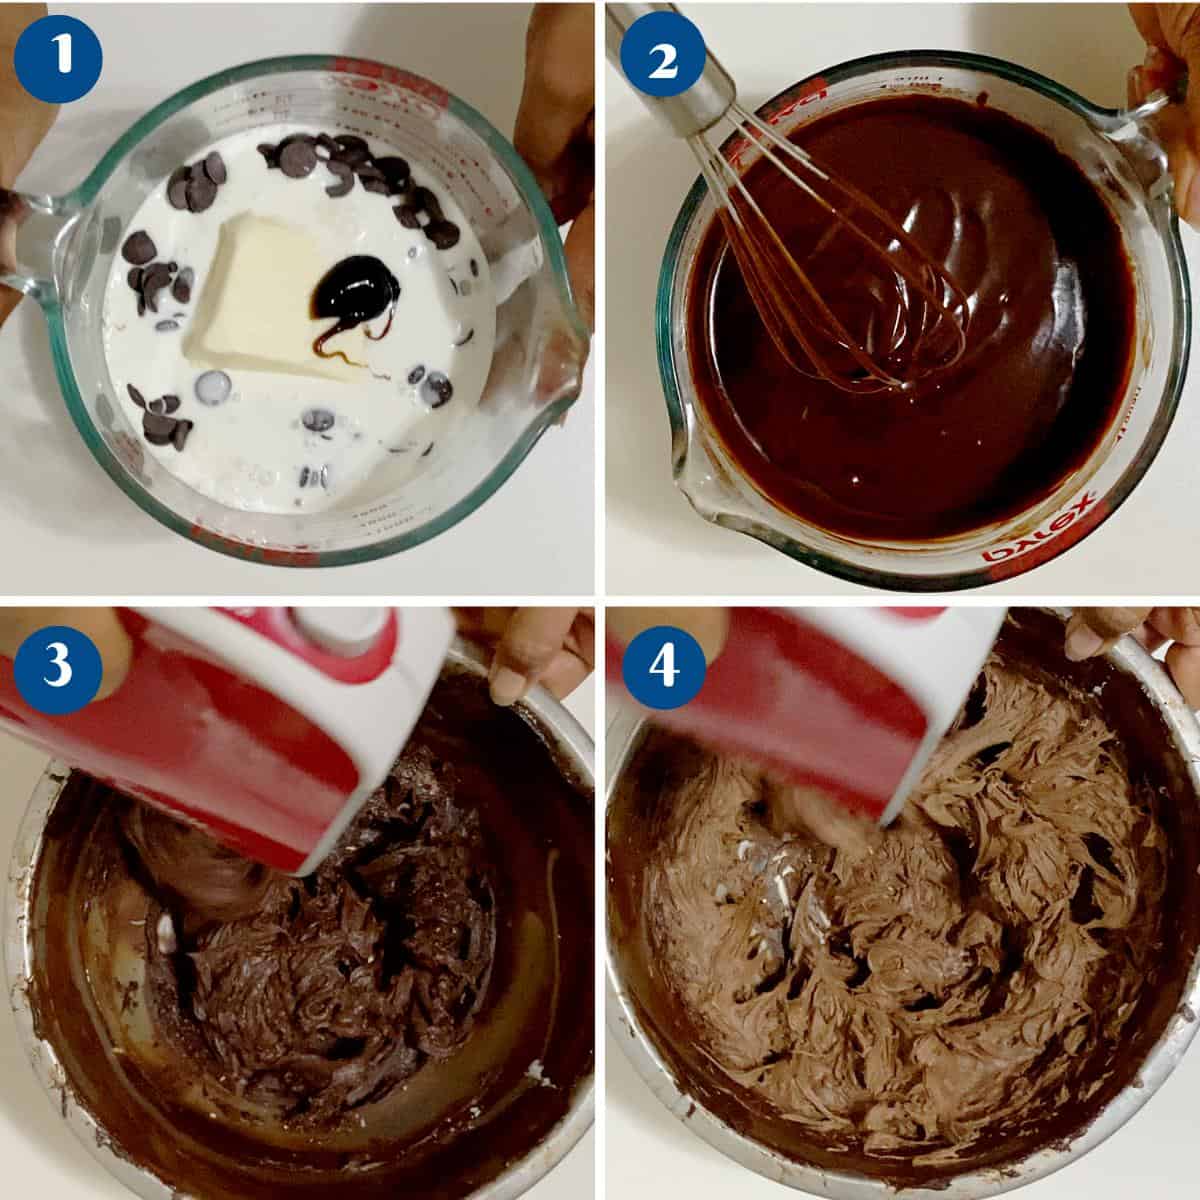 Progress pictures making whipped chocolate ganache.